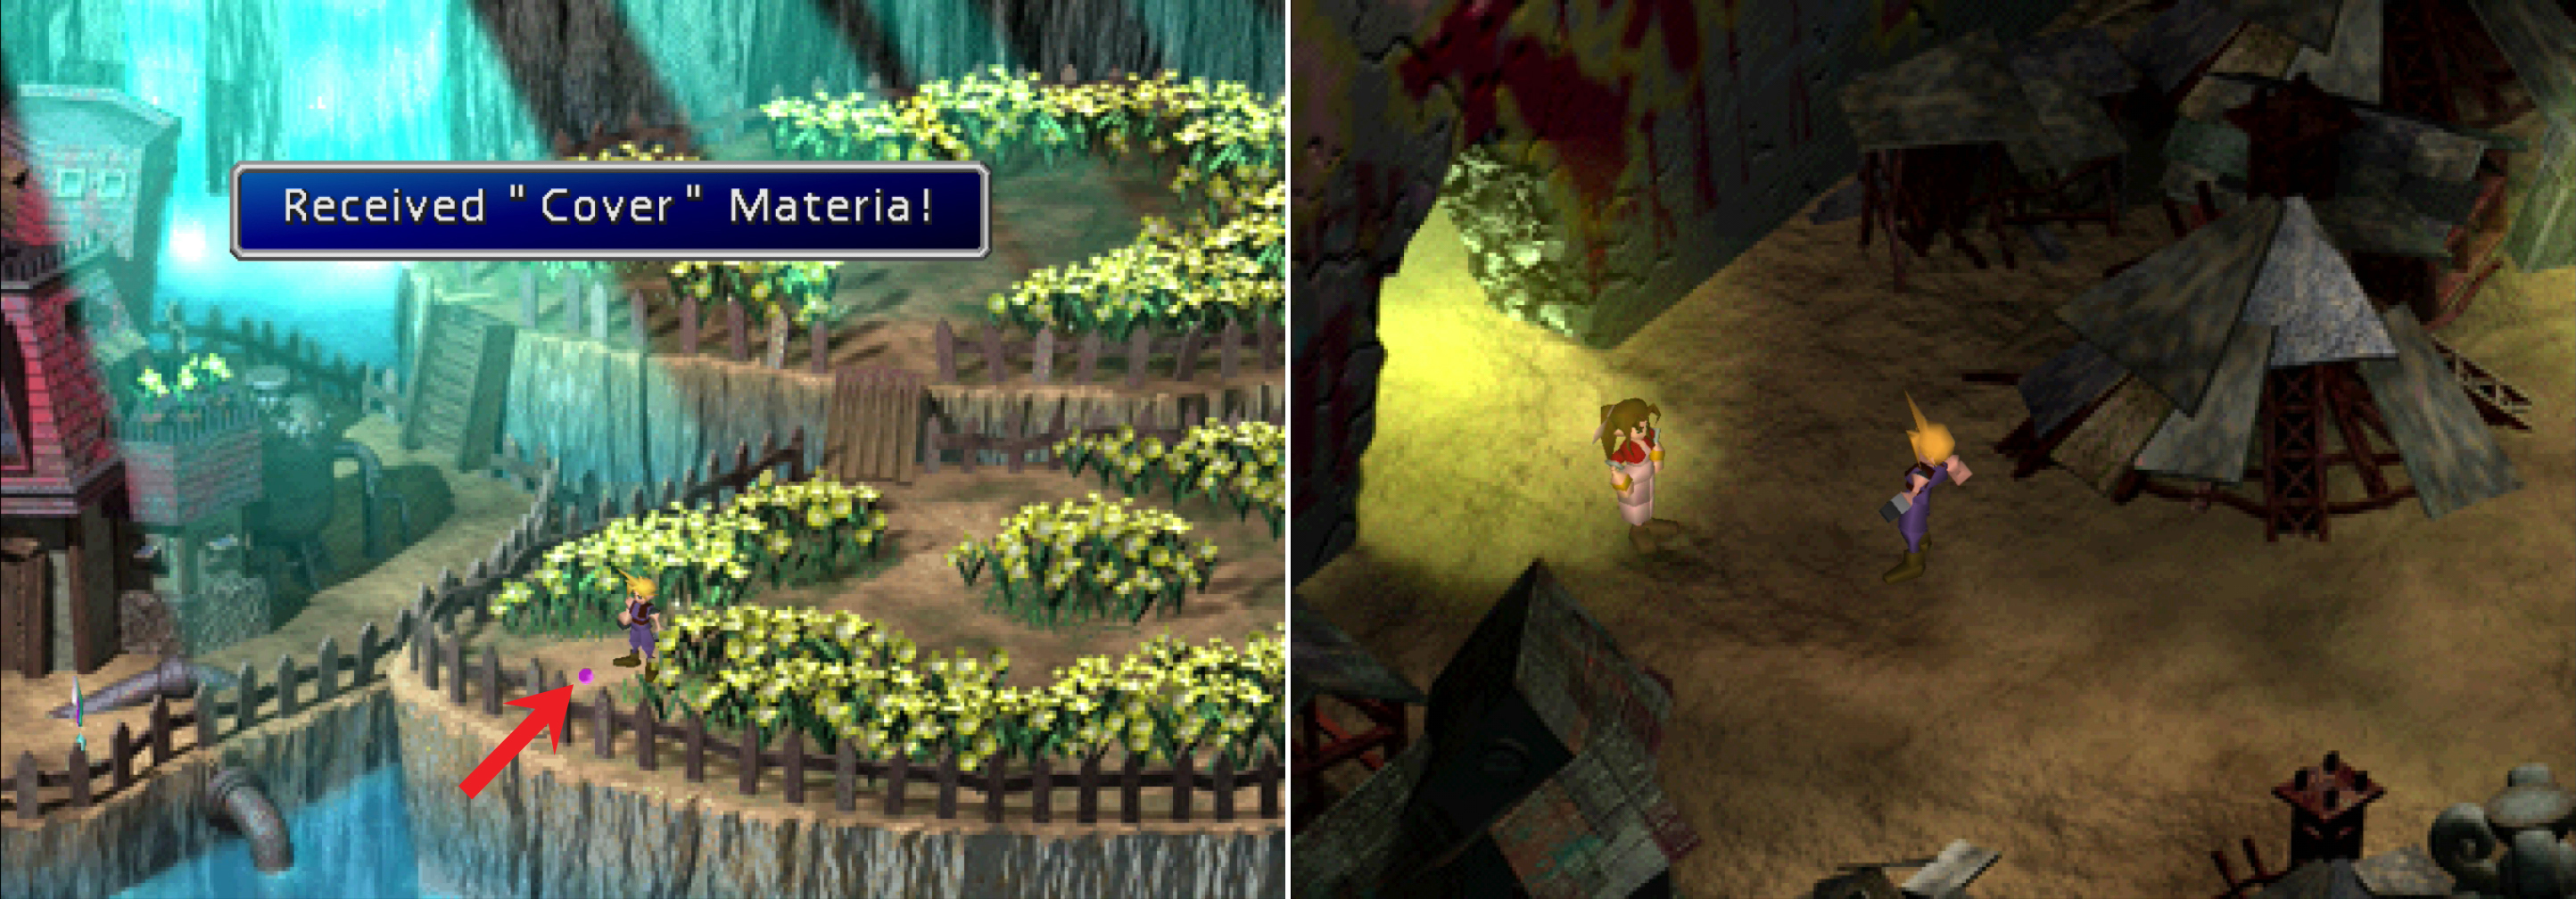 Pick up the Cover Materia in Aeriss garden (left) then do your best to sneak to Sector 6 without rousing Aeris… (right).